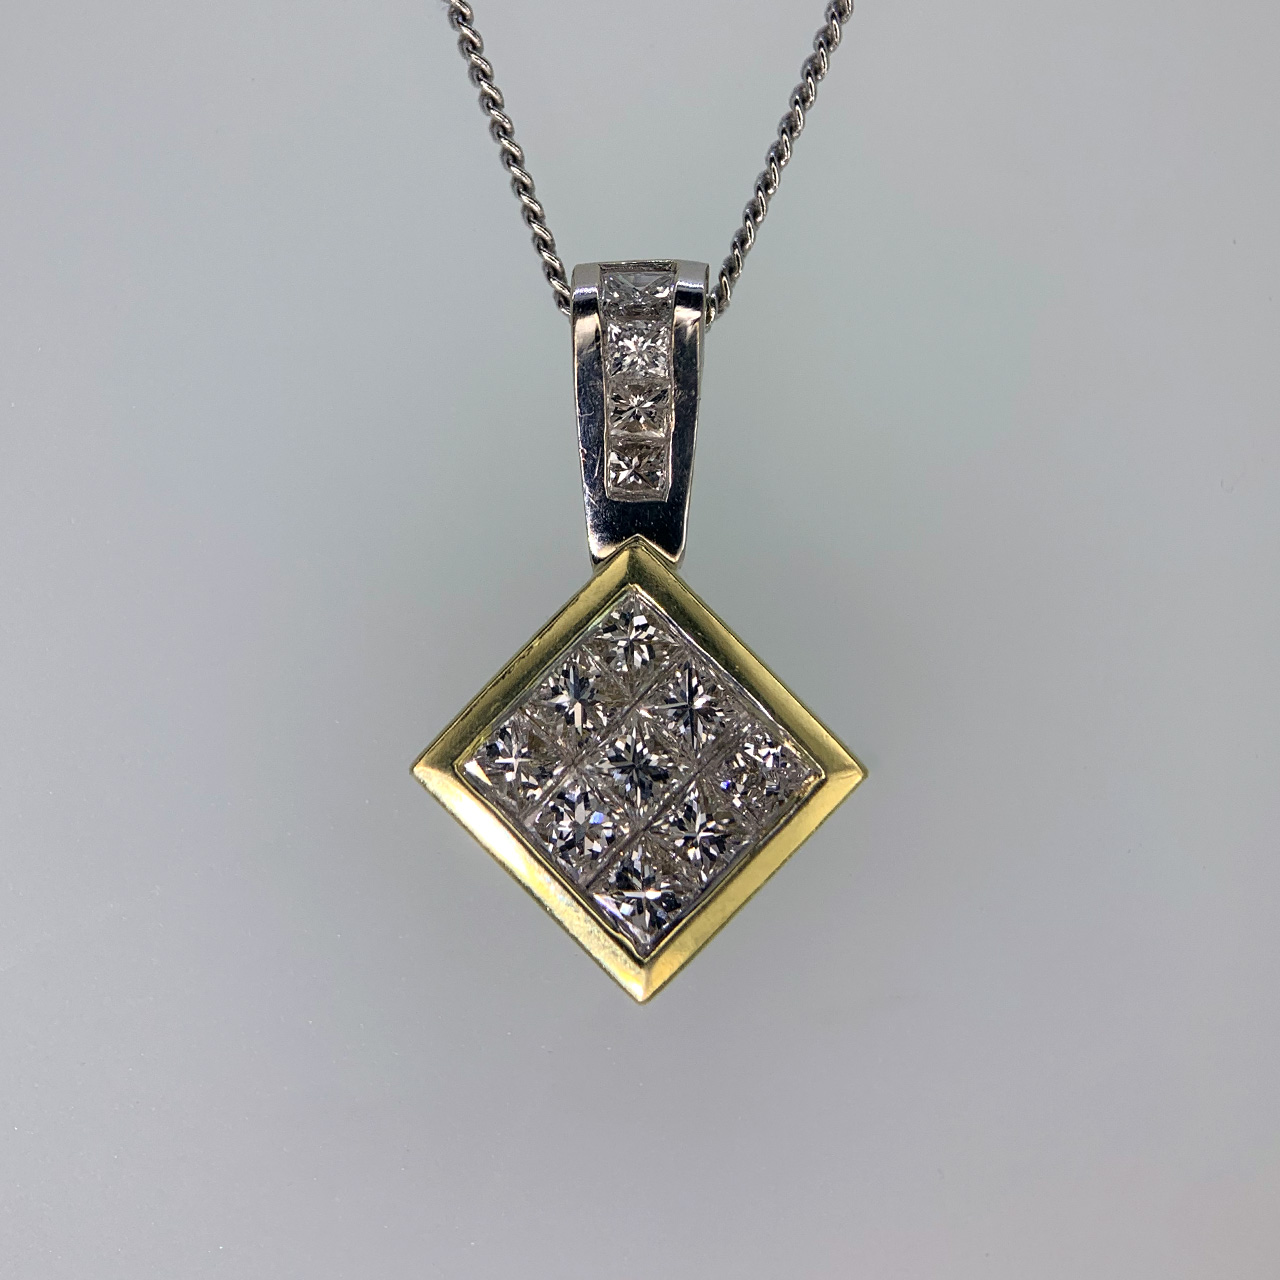 Stunning Pavé Diamond Pendant in 18ct stamped yellow and white Gold. The pendant holds nine princess cut diamonds in a yellow gold drop and four princess cut diamonds in a fixed white gold loop. The total pendant measures approximately 19.2mm x 12mm (including loop). 